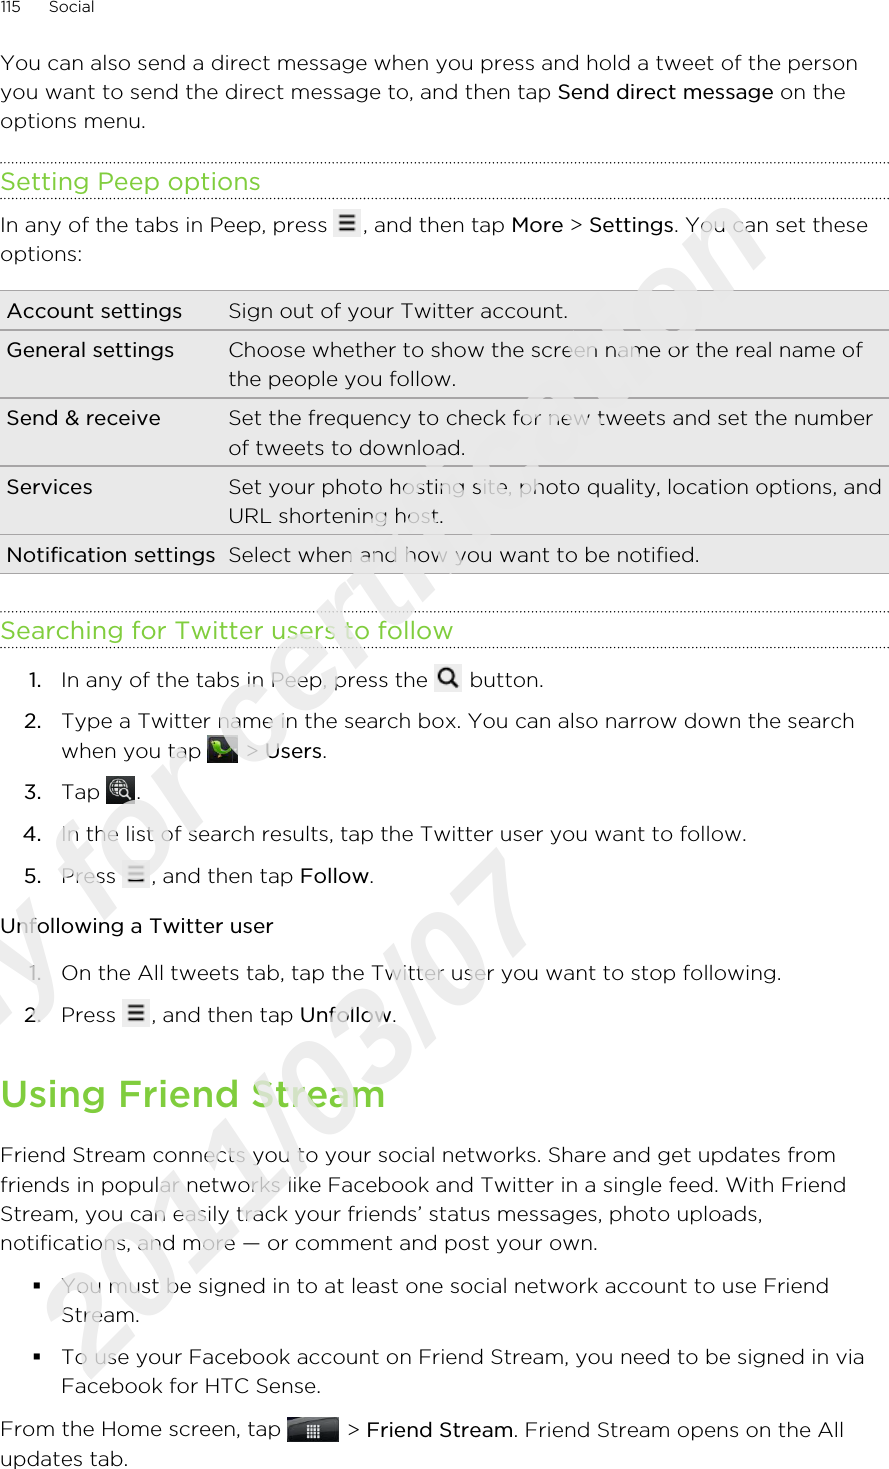 You can also send a direct message when you press and hold a tweet of the personyou want to send the direct message to, and then tap Send direct message on theoptions menu.Setting Peep optionsIn any of the tabs in Peep, press  , and then tap More &gt; Settings. You can set theseoptions:Account settings Sign out of your Twitter account.General settings Choose whether to show the screen name or the real name ofthe people you follow.Send &amp; receive Set the frequency to check for new tweets and set the numberof tweets to download.Services Set your photo hosting site, photo quality, location options, andURL shortening host.Notification settings Select when and how you want to be notified.Searching for Twitter users to follow1. In any of the tabs in Peep, press the   button.2. Type a Twitter name in the search box. You can also narrow down the searchwhen you tap   &gt; Users.3. Tap  .4. In the list of search results, tap the Twitter user you want to follow.5. Press  , and then tap Follow.Unfollowing a Twitter user1. On the All tweets tab, tap the Twitter user you want to stop following.2. Press  , and then tap Unfollow.Using Friend StreamFriend Stream connects you to your social networks. Share and get updates fromfriends in popular networks like Facebook and Twitter in a single feed. With FriendStream, you can easily track your friends’ status messages, photo uploads,notifications, and more — or comment and post your own.§You must be signed in to at least one social network account to use FriendStream.§To use your Facebook account on Friend Stream, you need to be signed in viaFacebook for HTC Sense.From the Home screen, tap   &gt; Friend Stream. Friend Stream opens on the Allupdates tab.115 SocialOnly for certification  2011/03/07